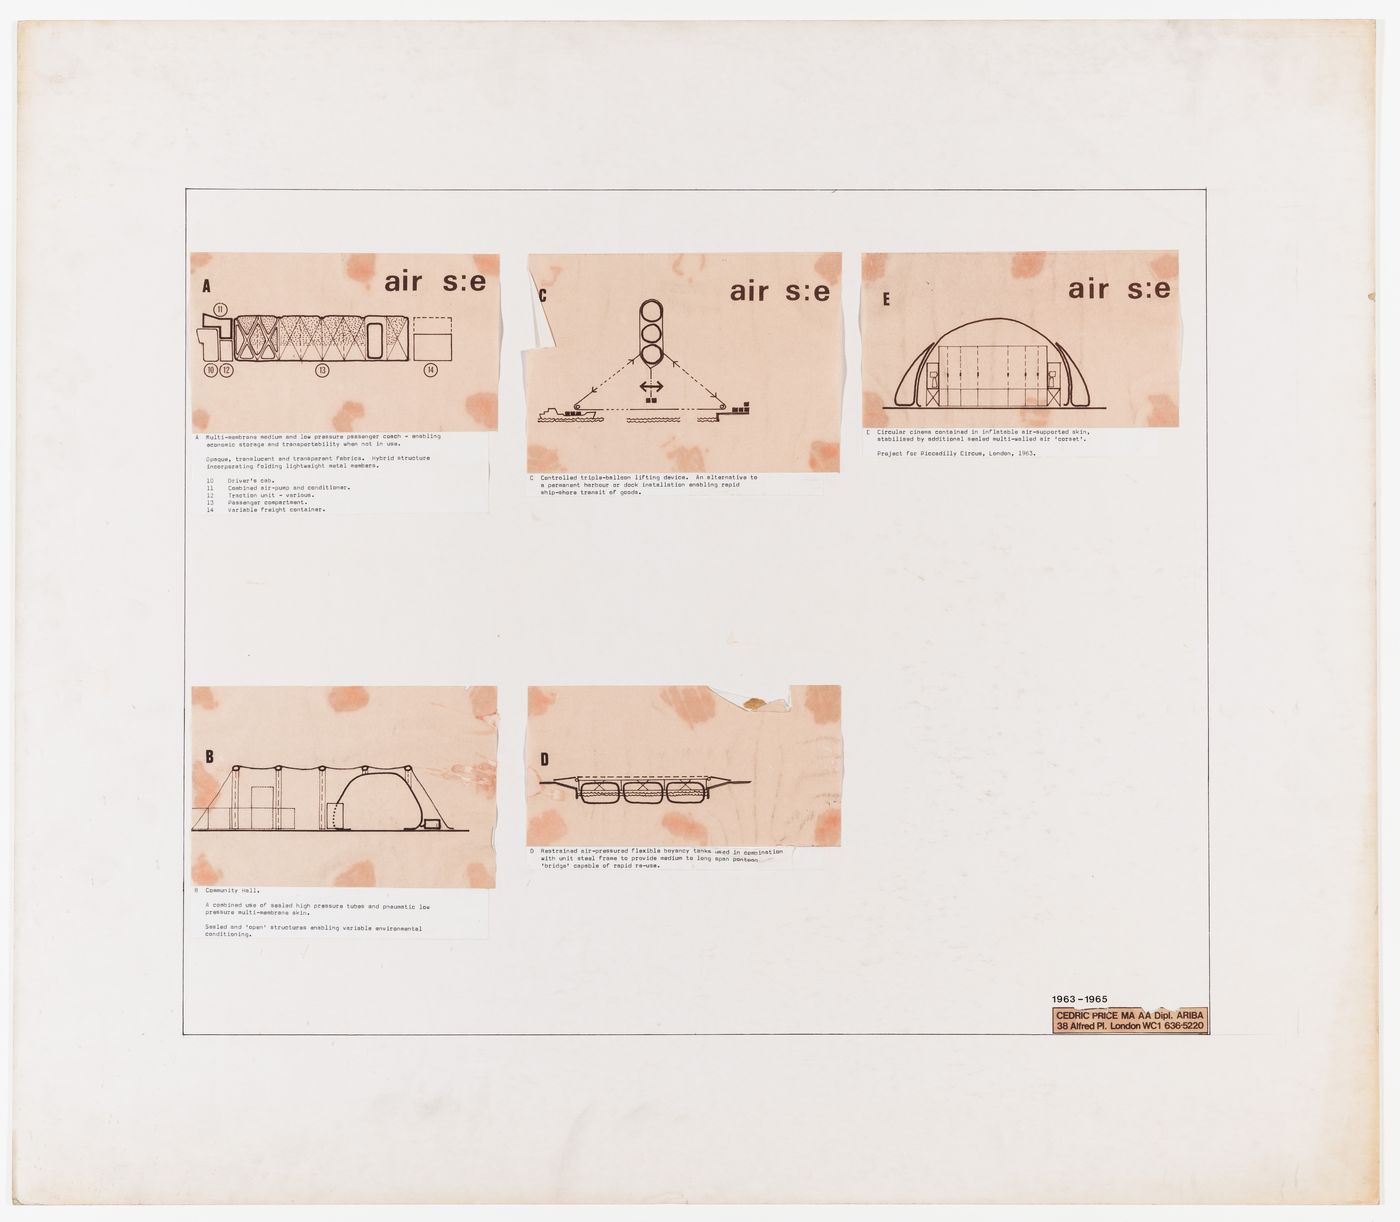 Air structures research: presentation panel illustrating five projects for air structures from the period 1963-1965